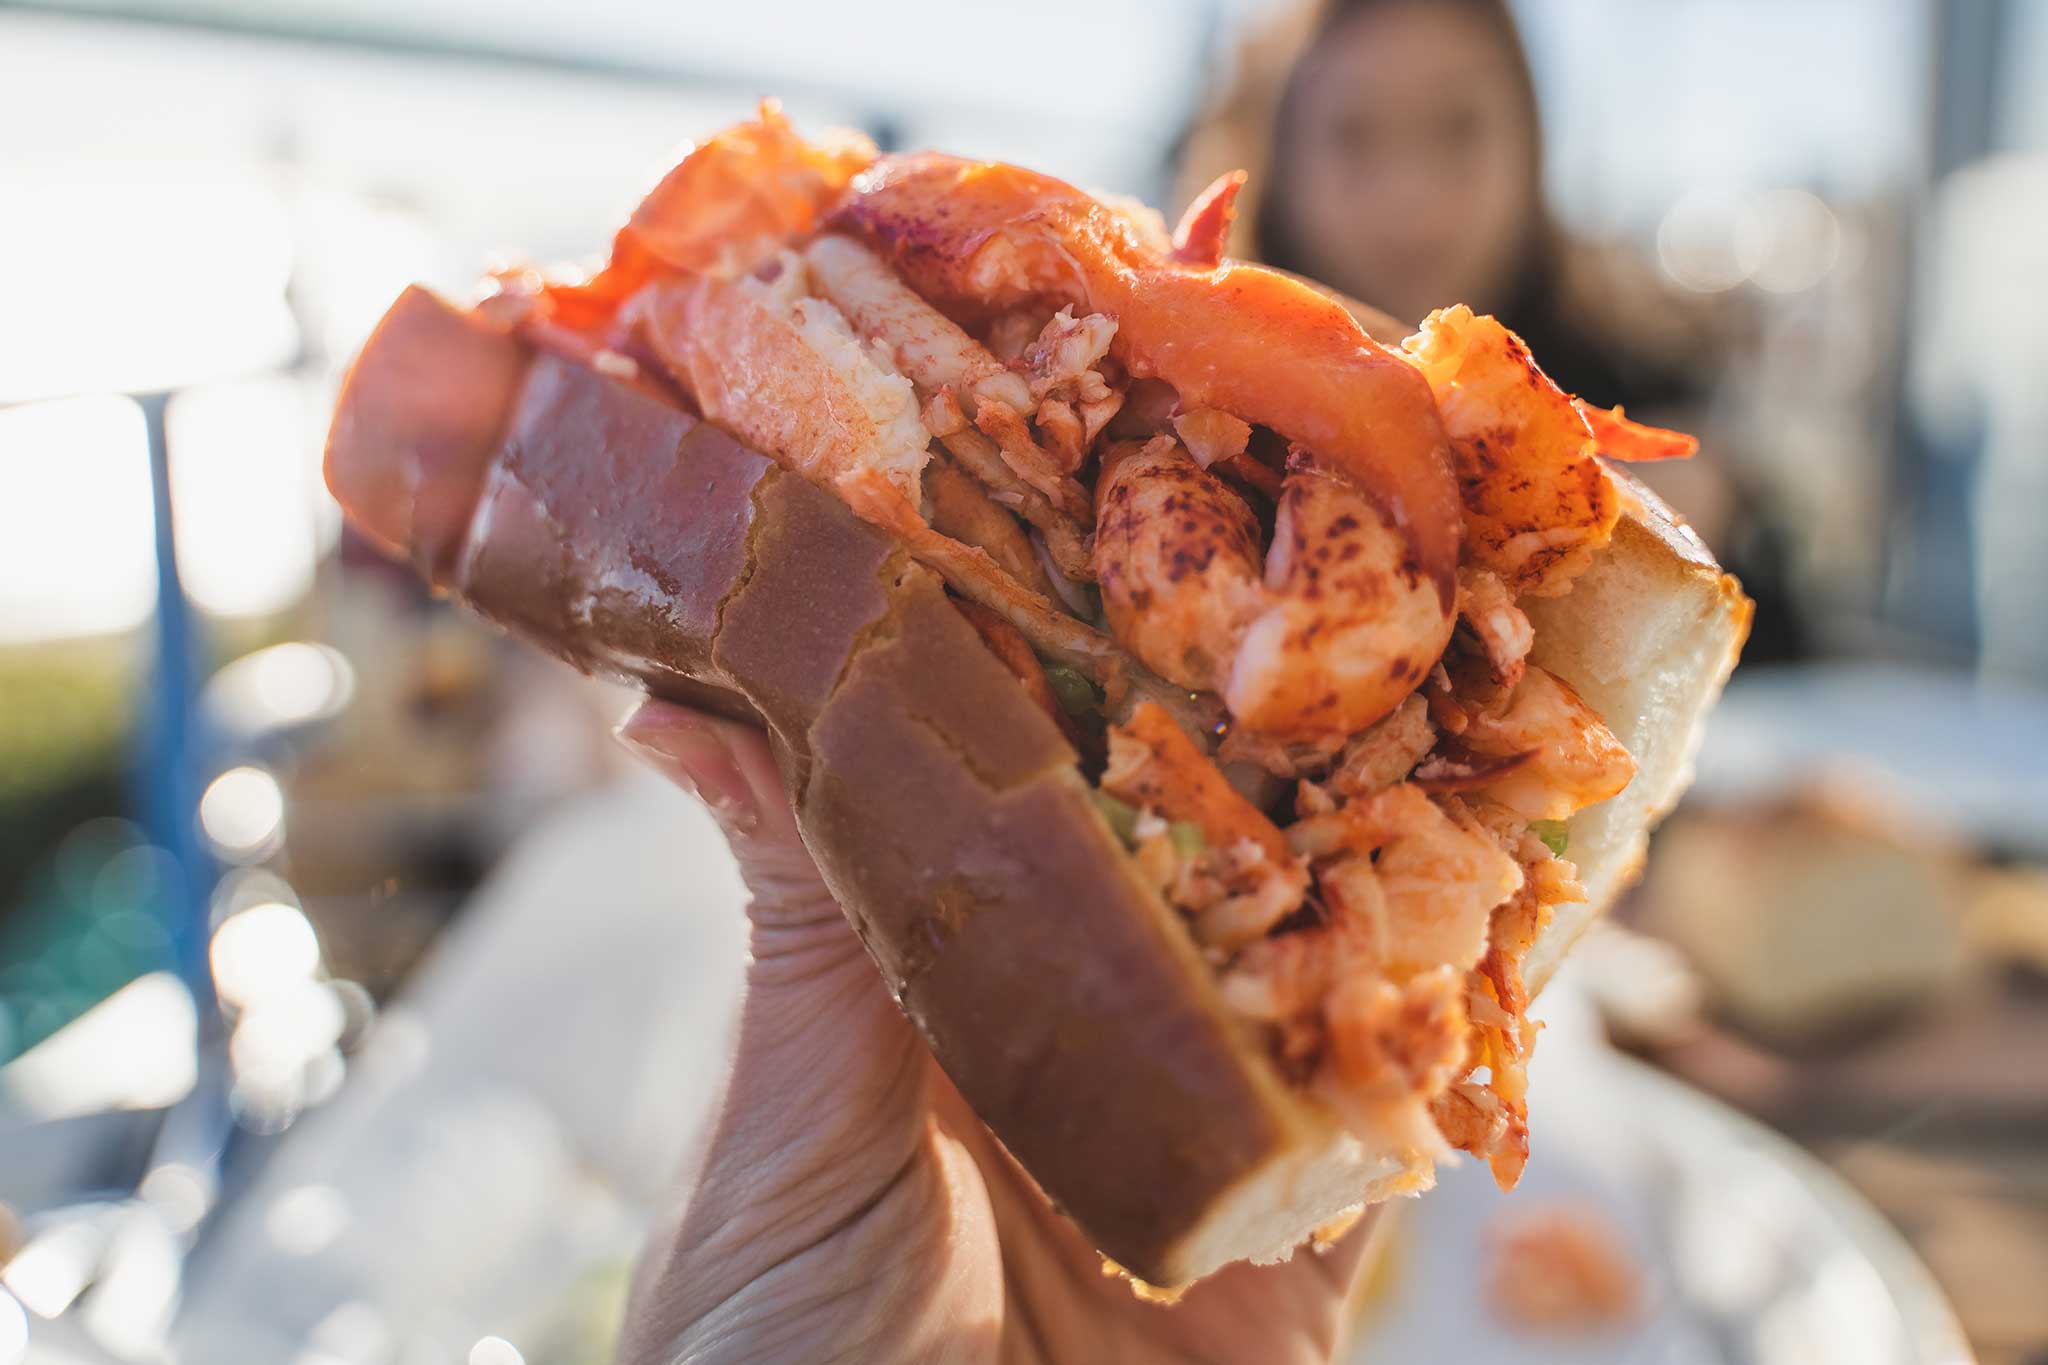 A freshly prepared lobster roll with generous servings of succulent lobster meat held up close for the camera on a beautiful, sunny day.